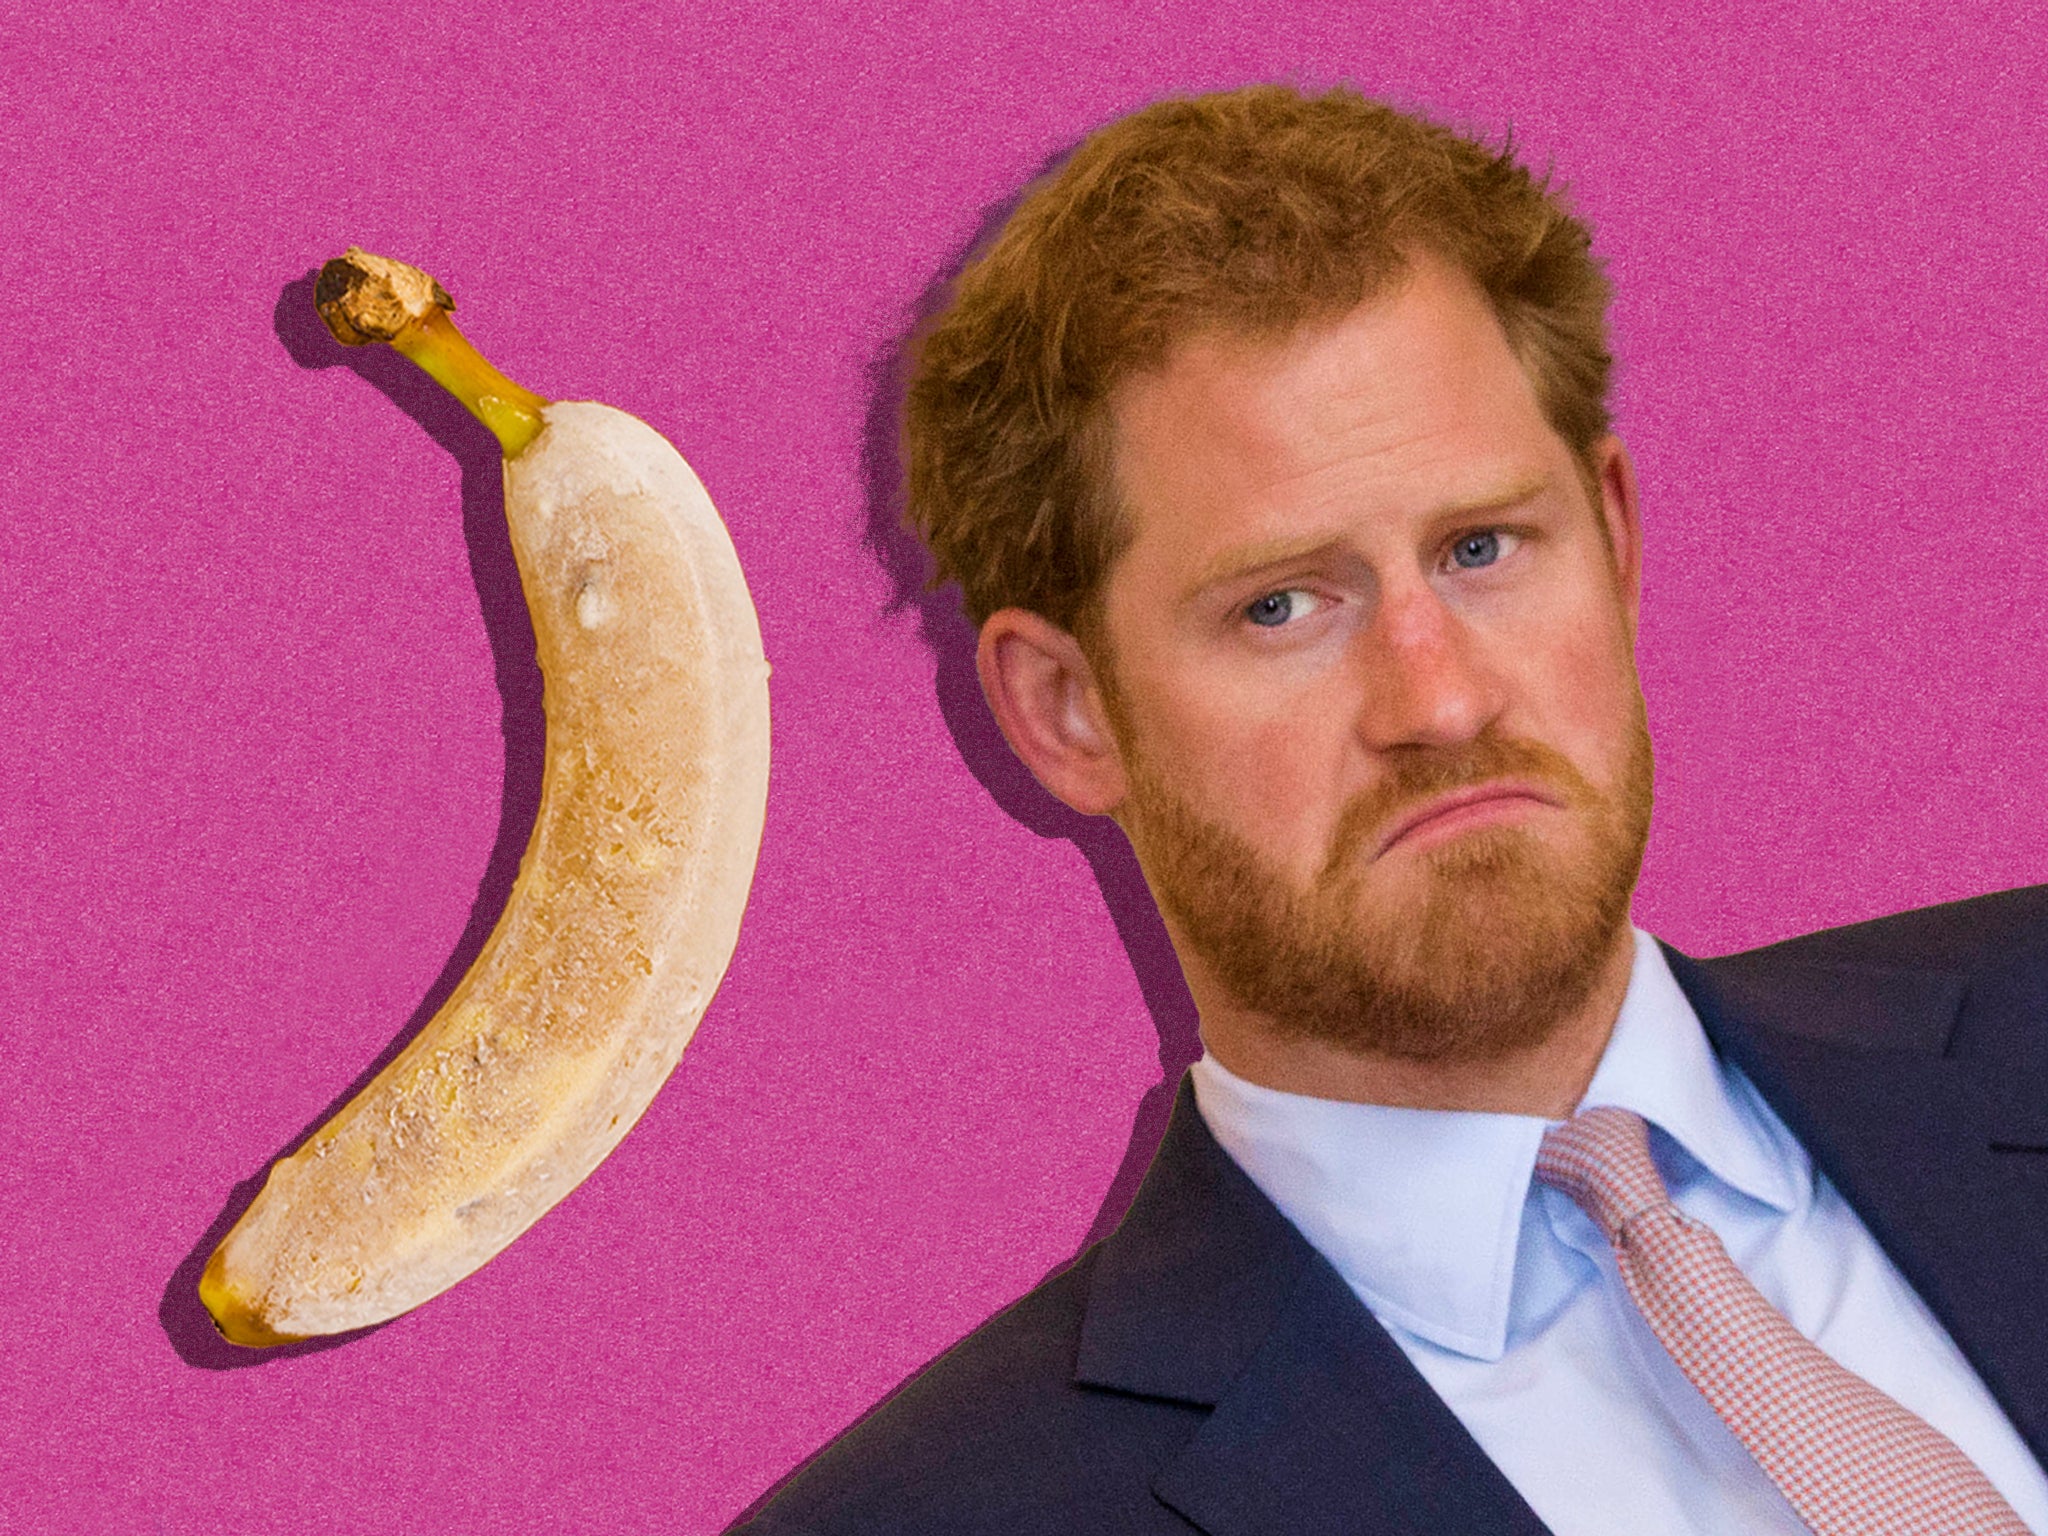 Mr Freeze: Prince Harry just had to tell us about the time his penis got frostbite